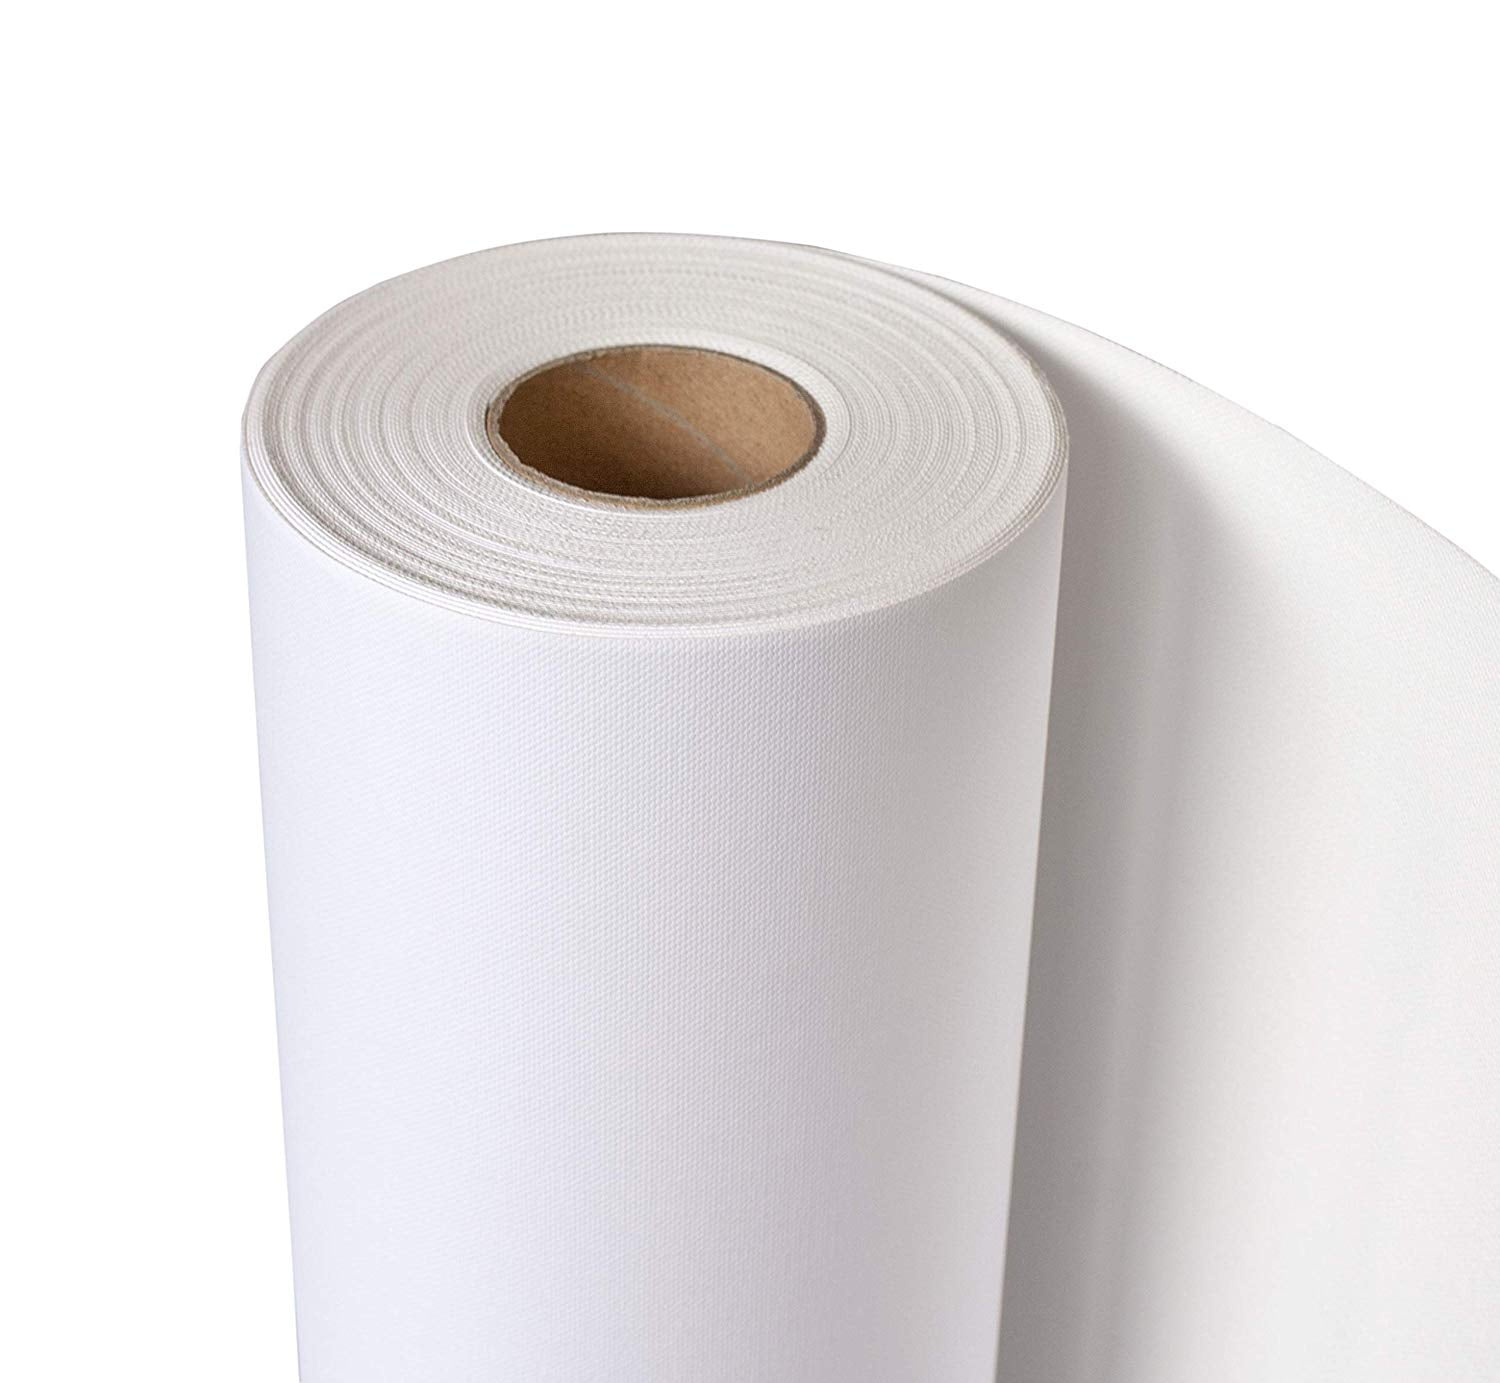 44 Inch x100 Feet 290gsm Surface Polyester Thick Canvas Professional Matte Canvas Roll for Epson Canon HP Inkjet Printing 